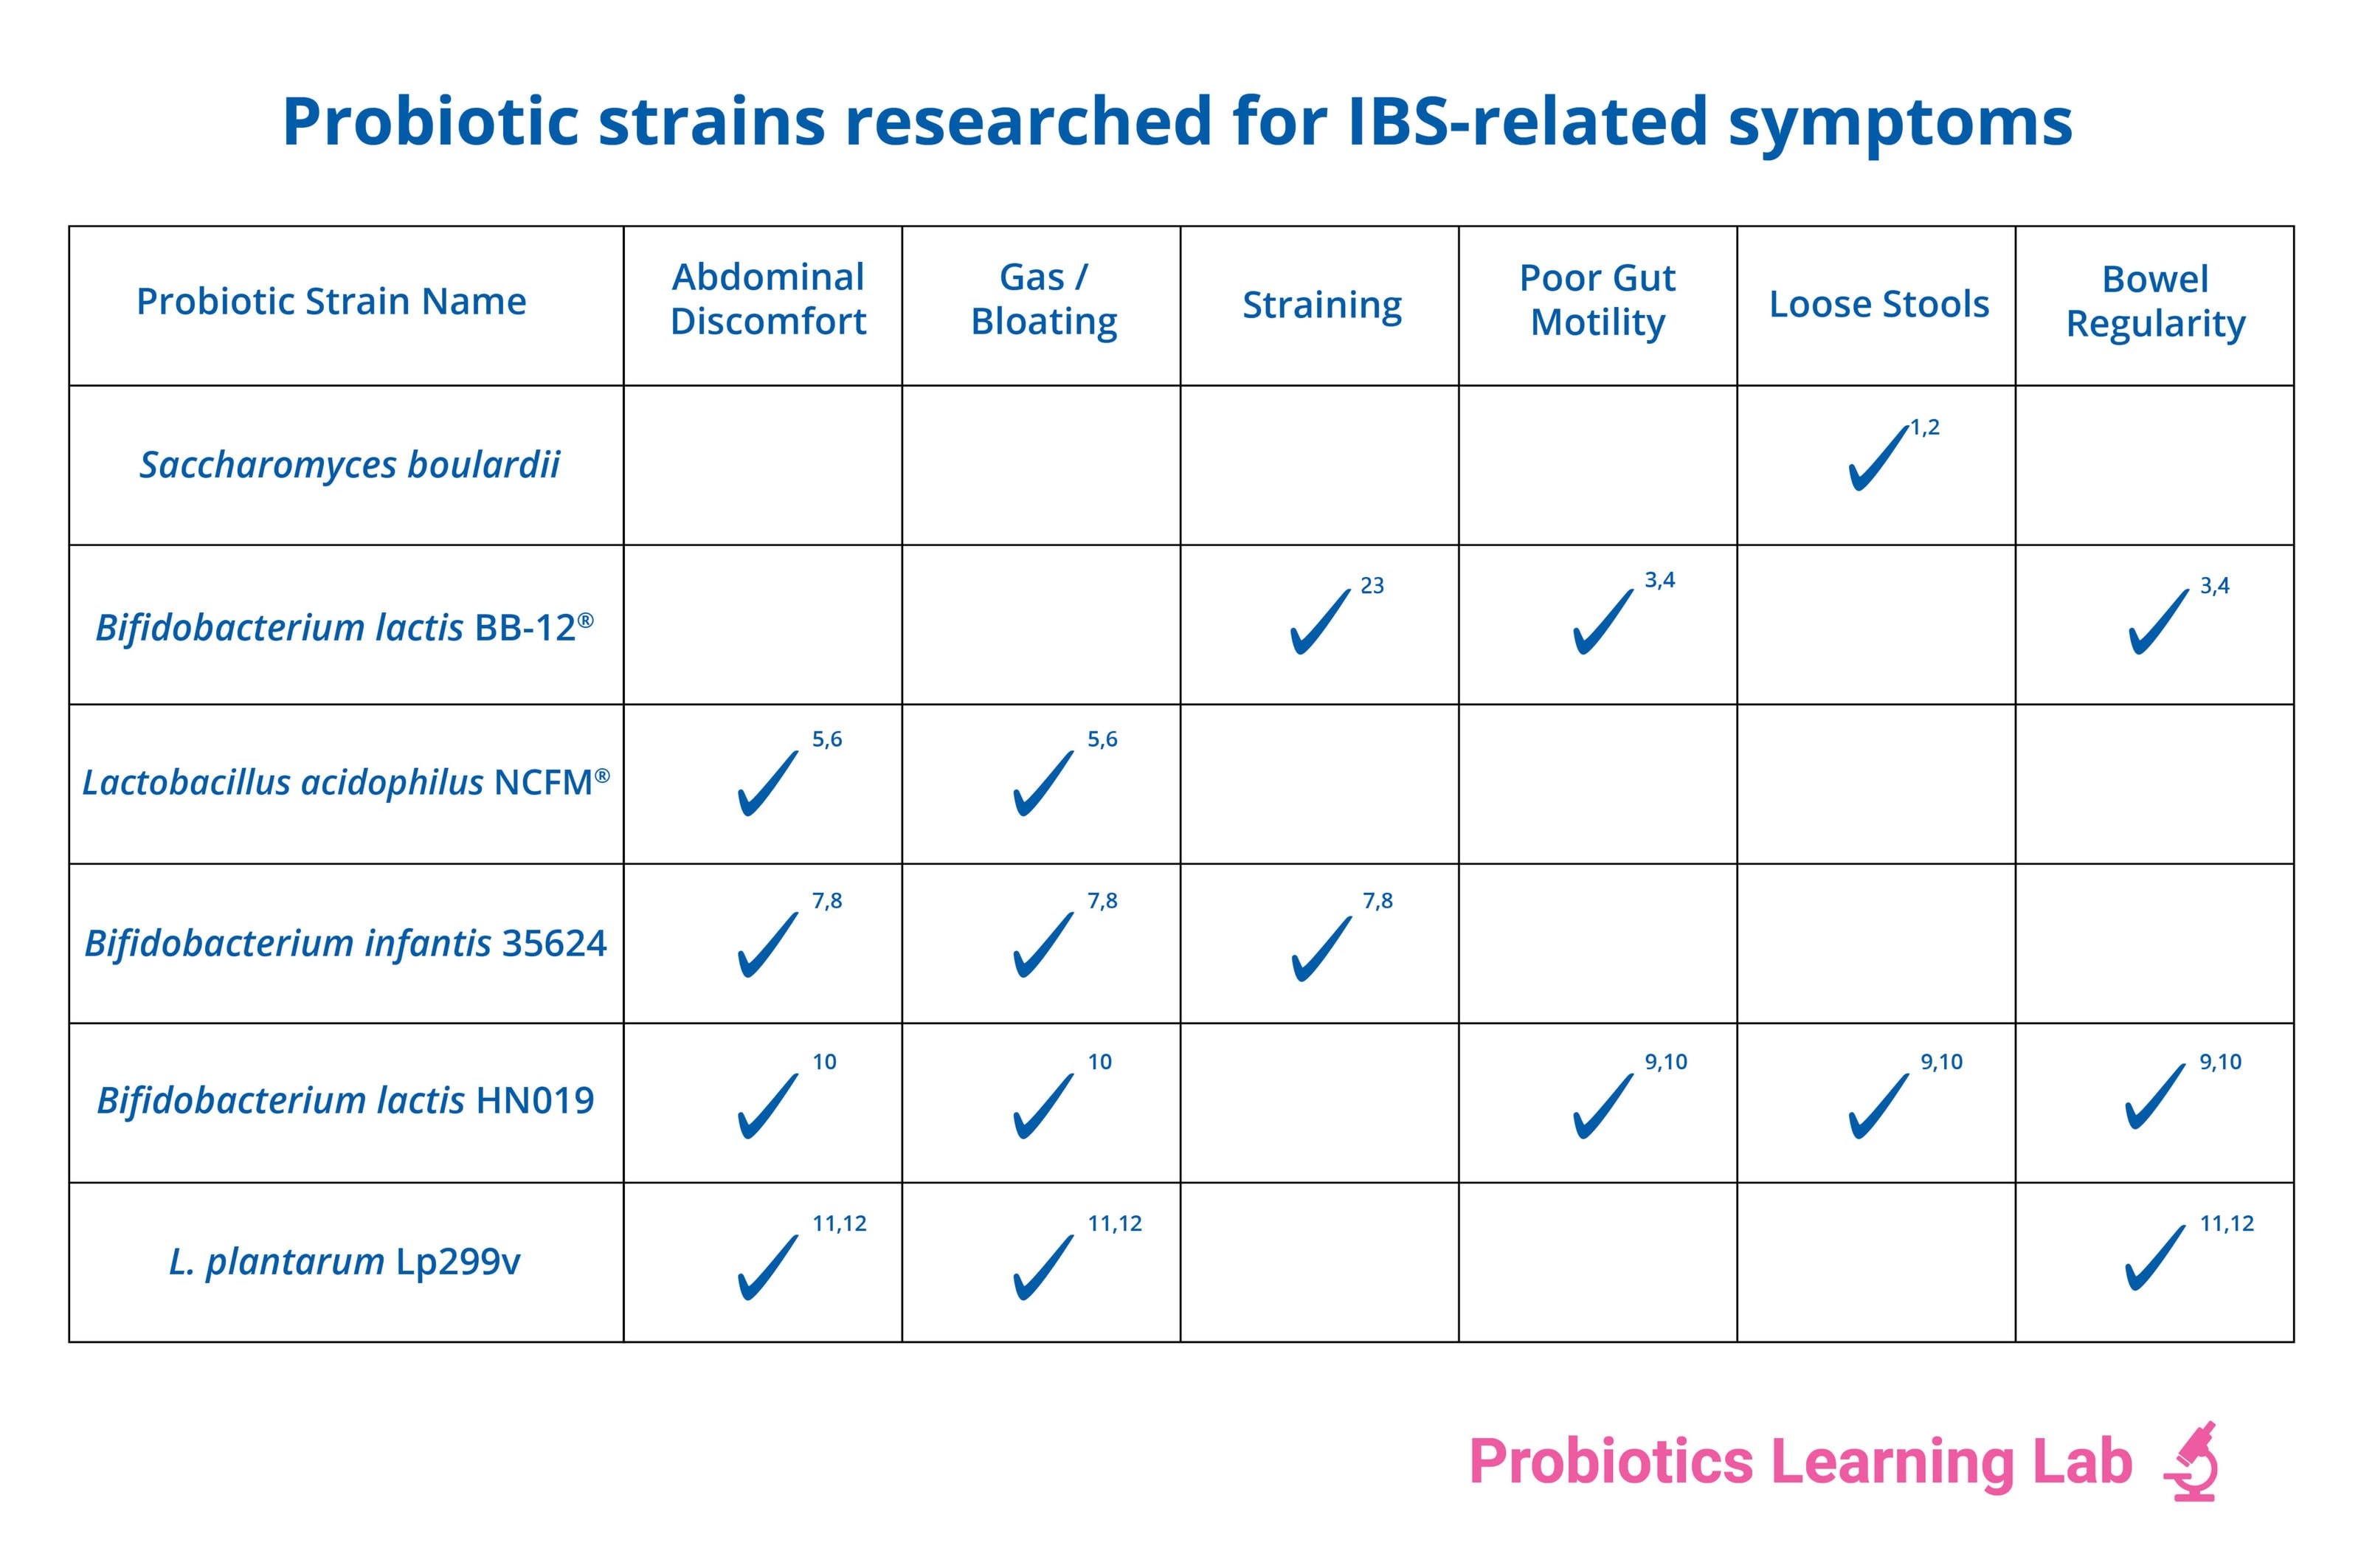 probiotic strains researched for IBS